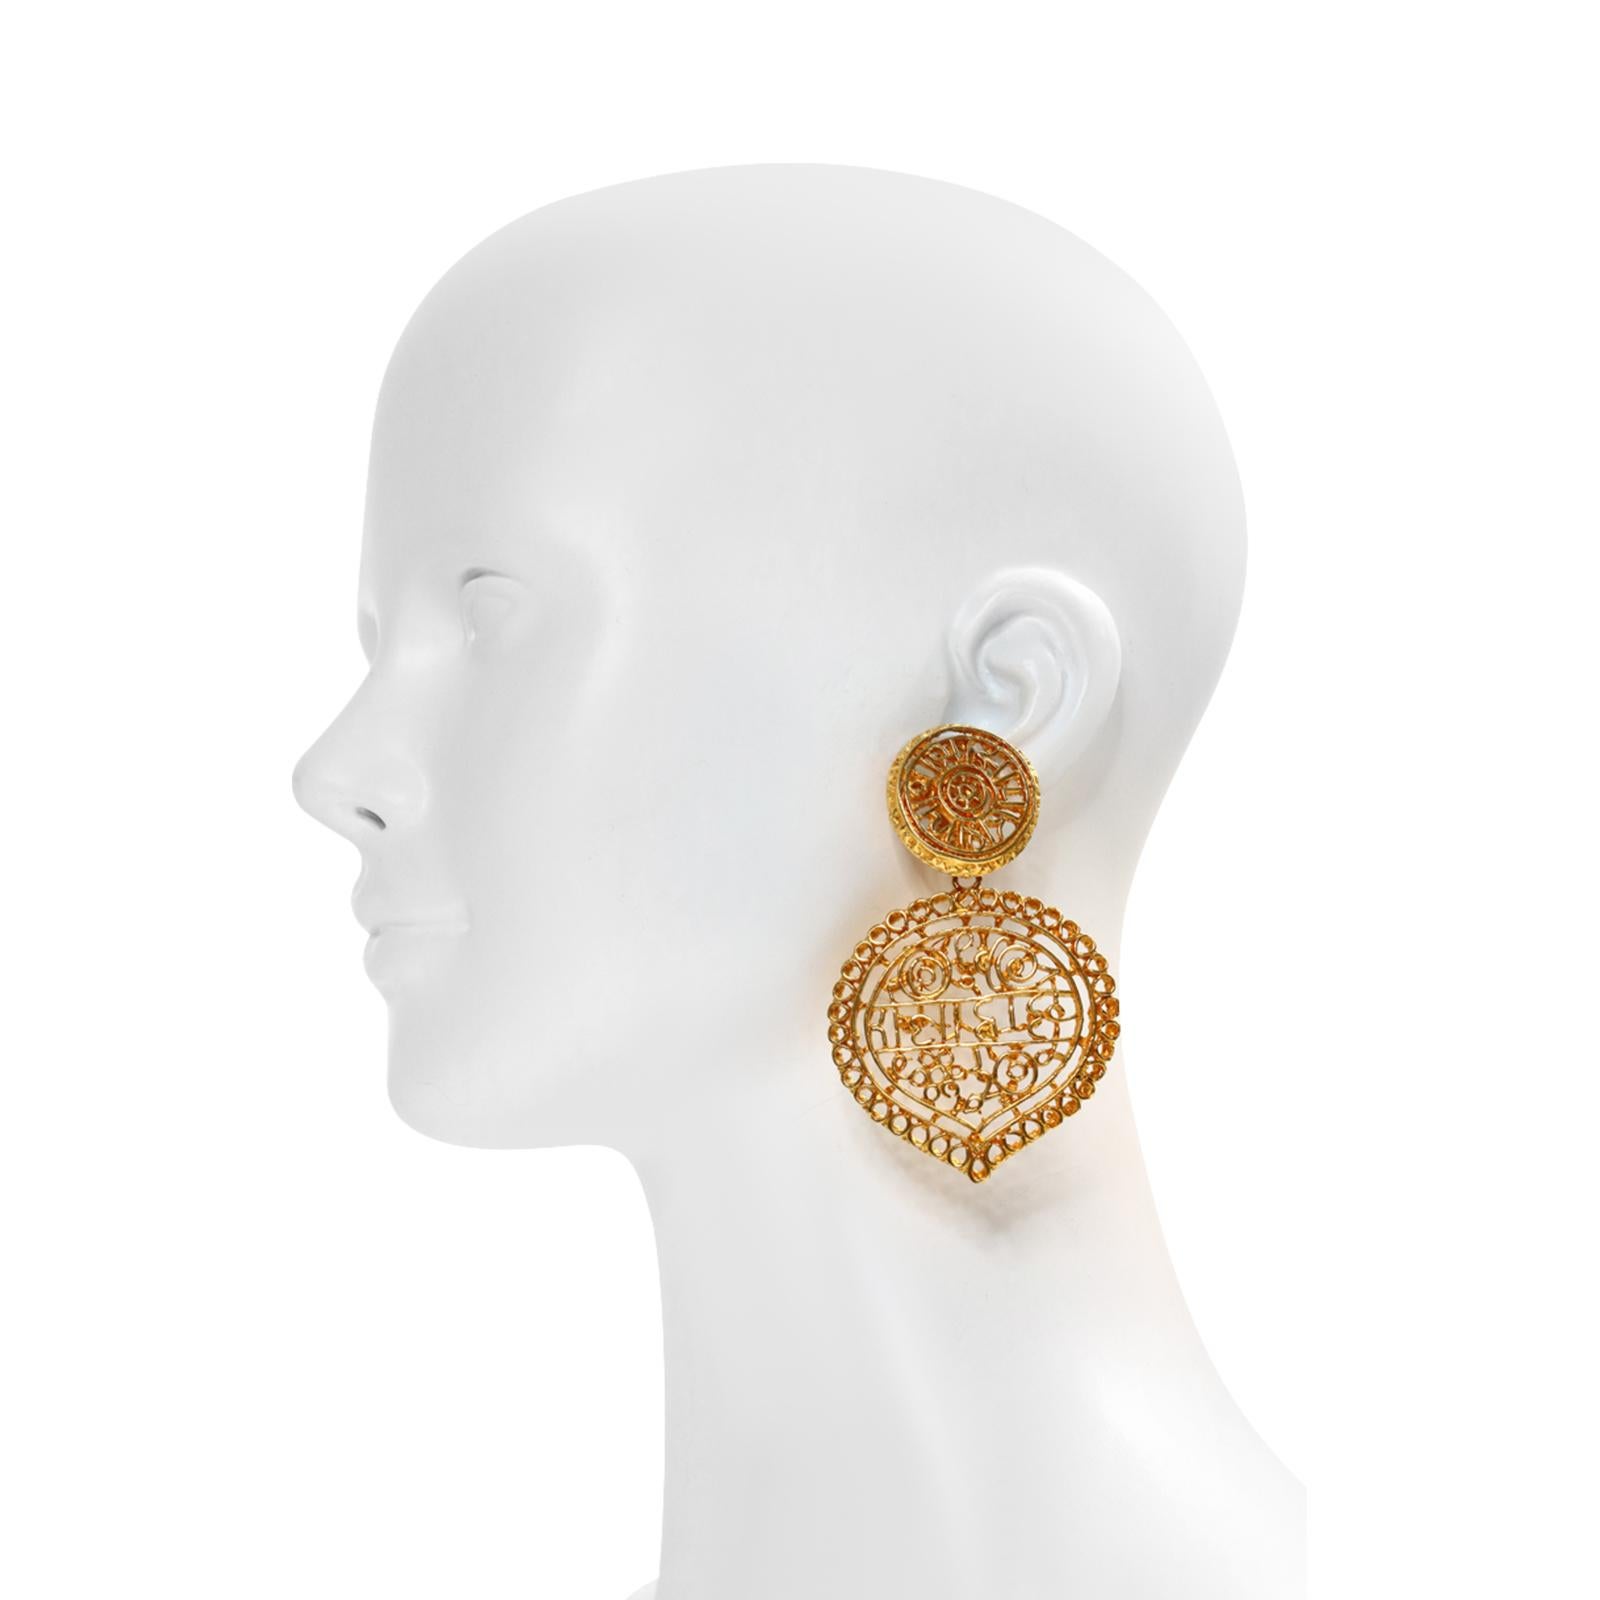 Vintage KJL Gold Tone Dangling Earrings. Large dangling front facing earrings with gold swirly patterns that appear to have some script writing. Tear dropped that hang from a round shape.  KJL made and still makes some great jewelry. Some of the